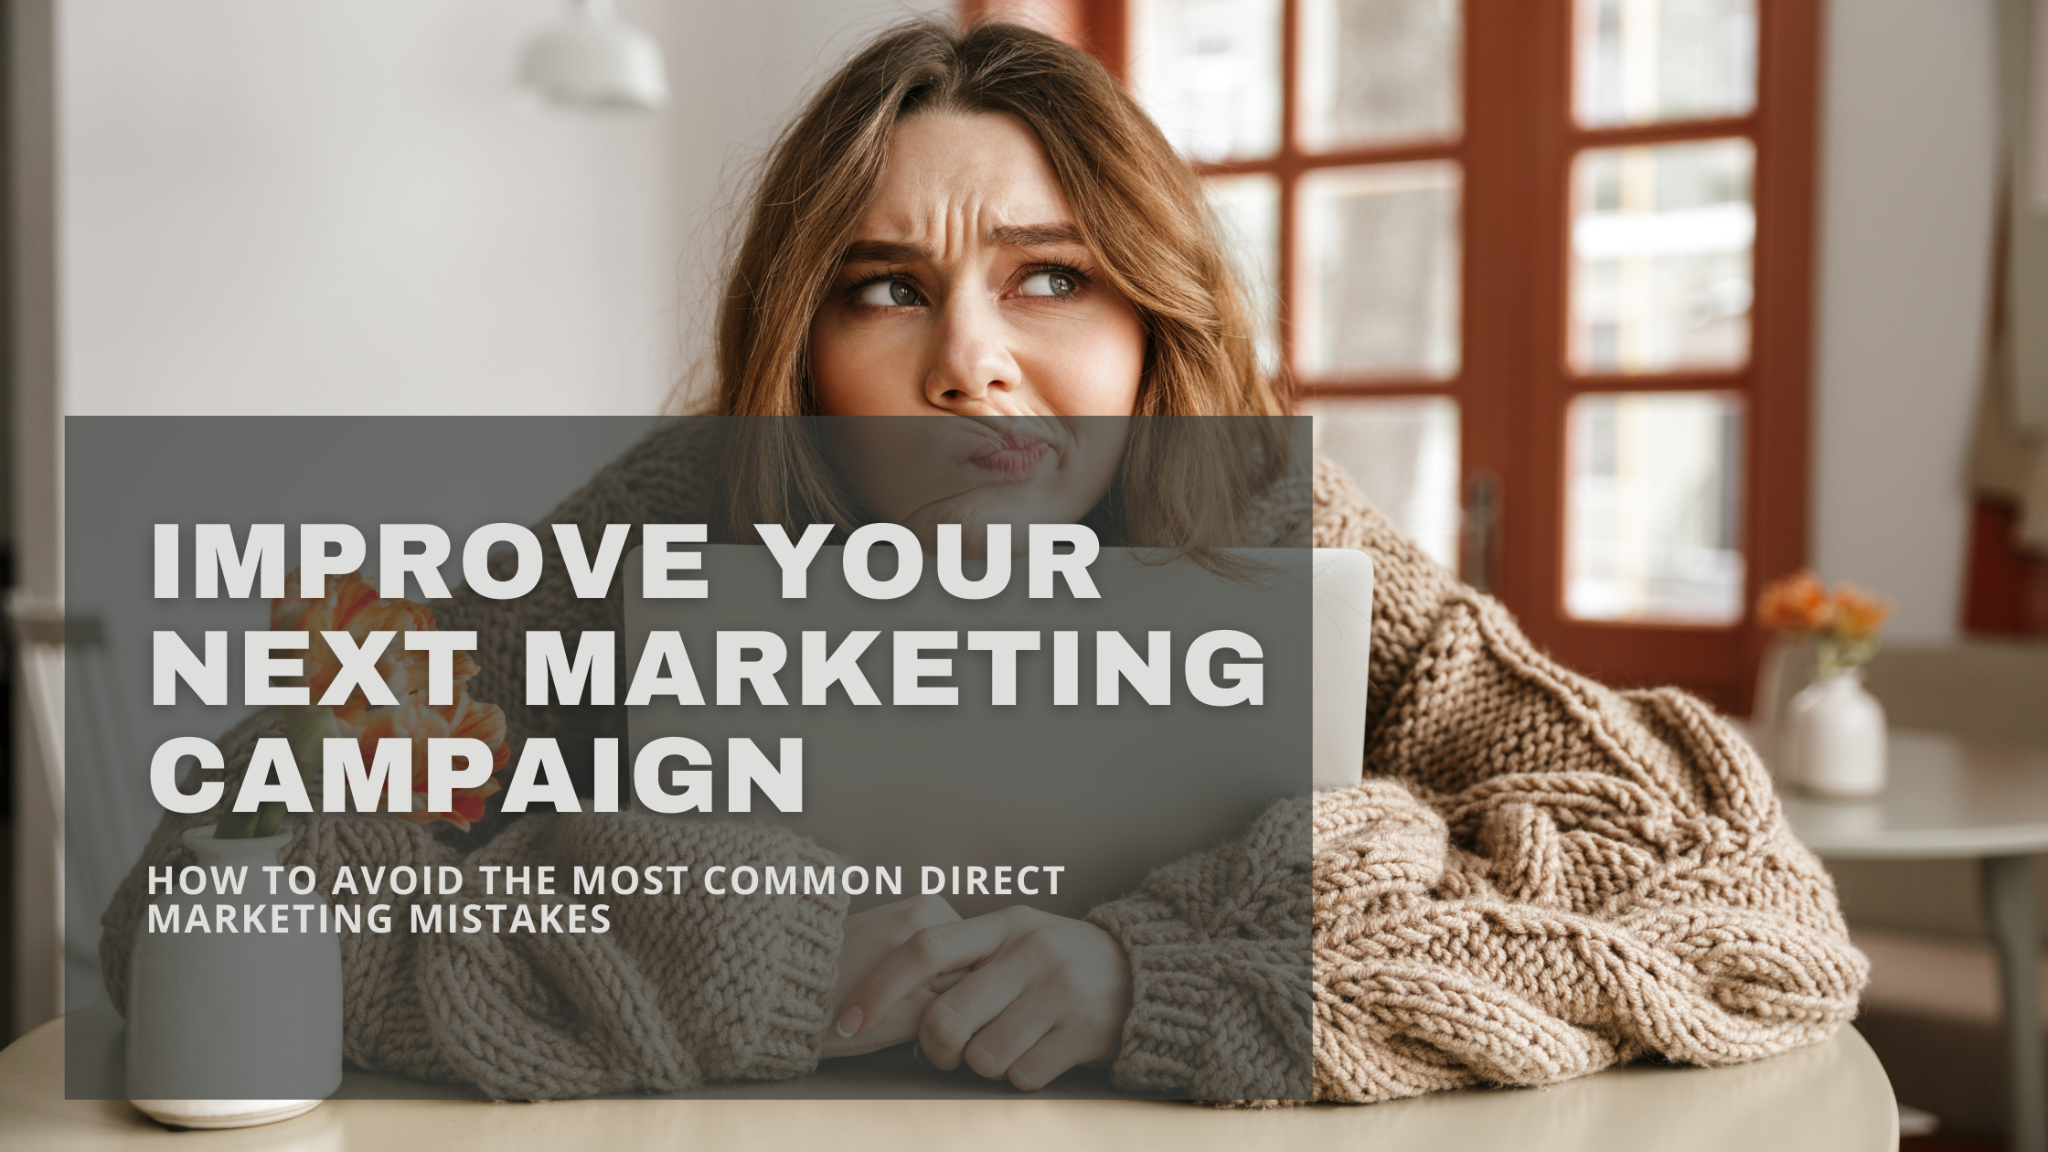 Your marketing campaign didn’t work, what went wrong?